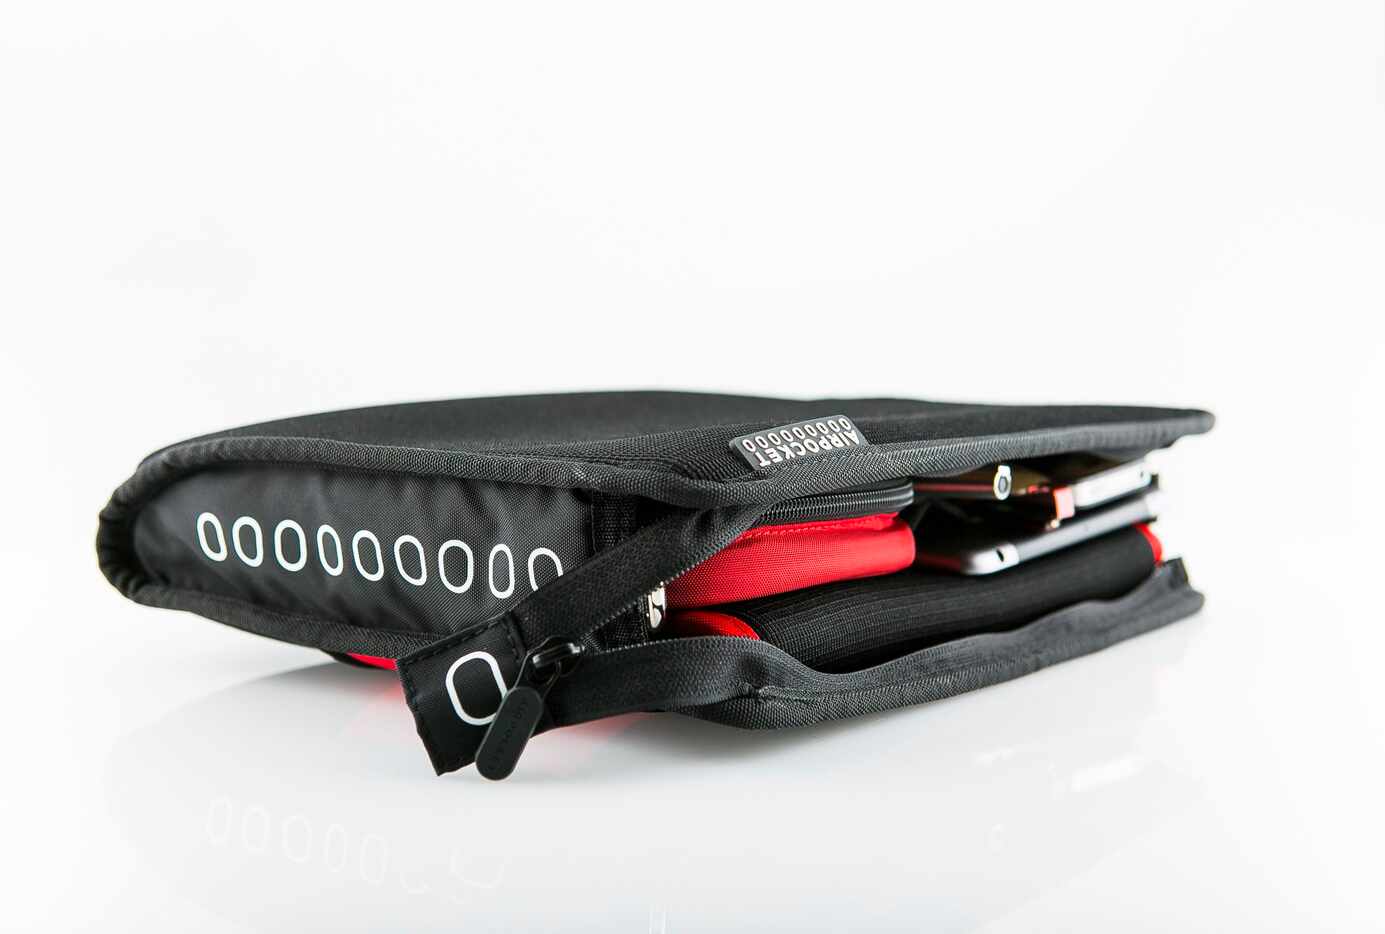 The Airpocket is a small bag designed to sit in the seatback pocket.